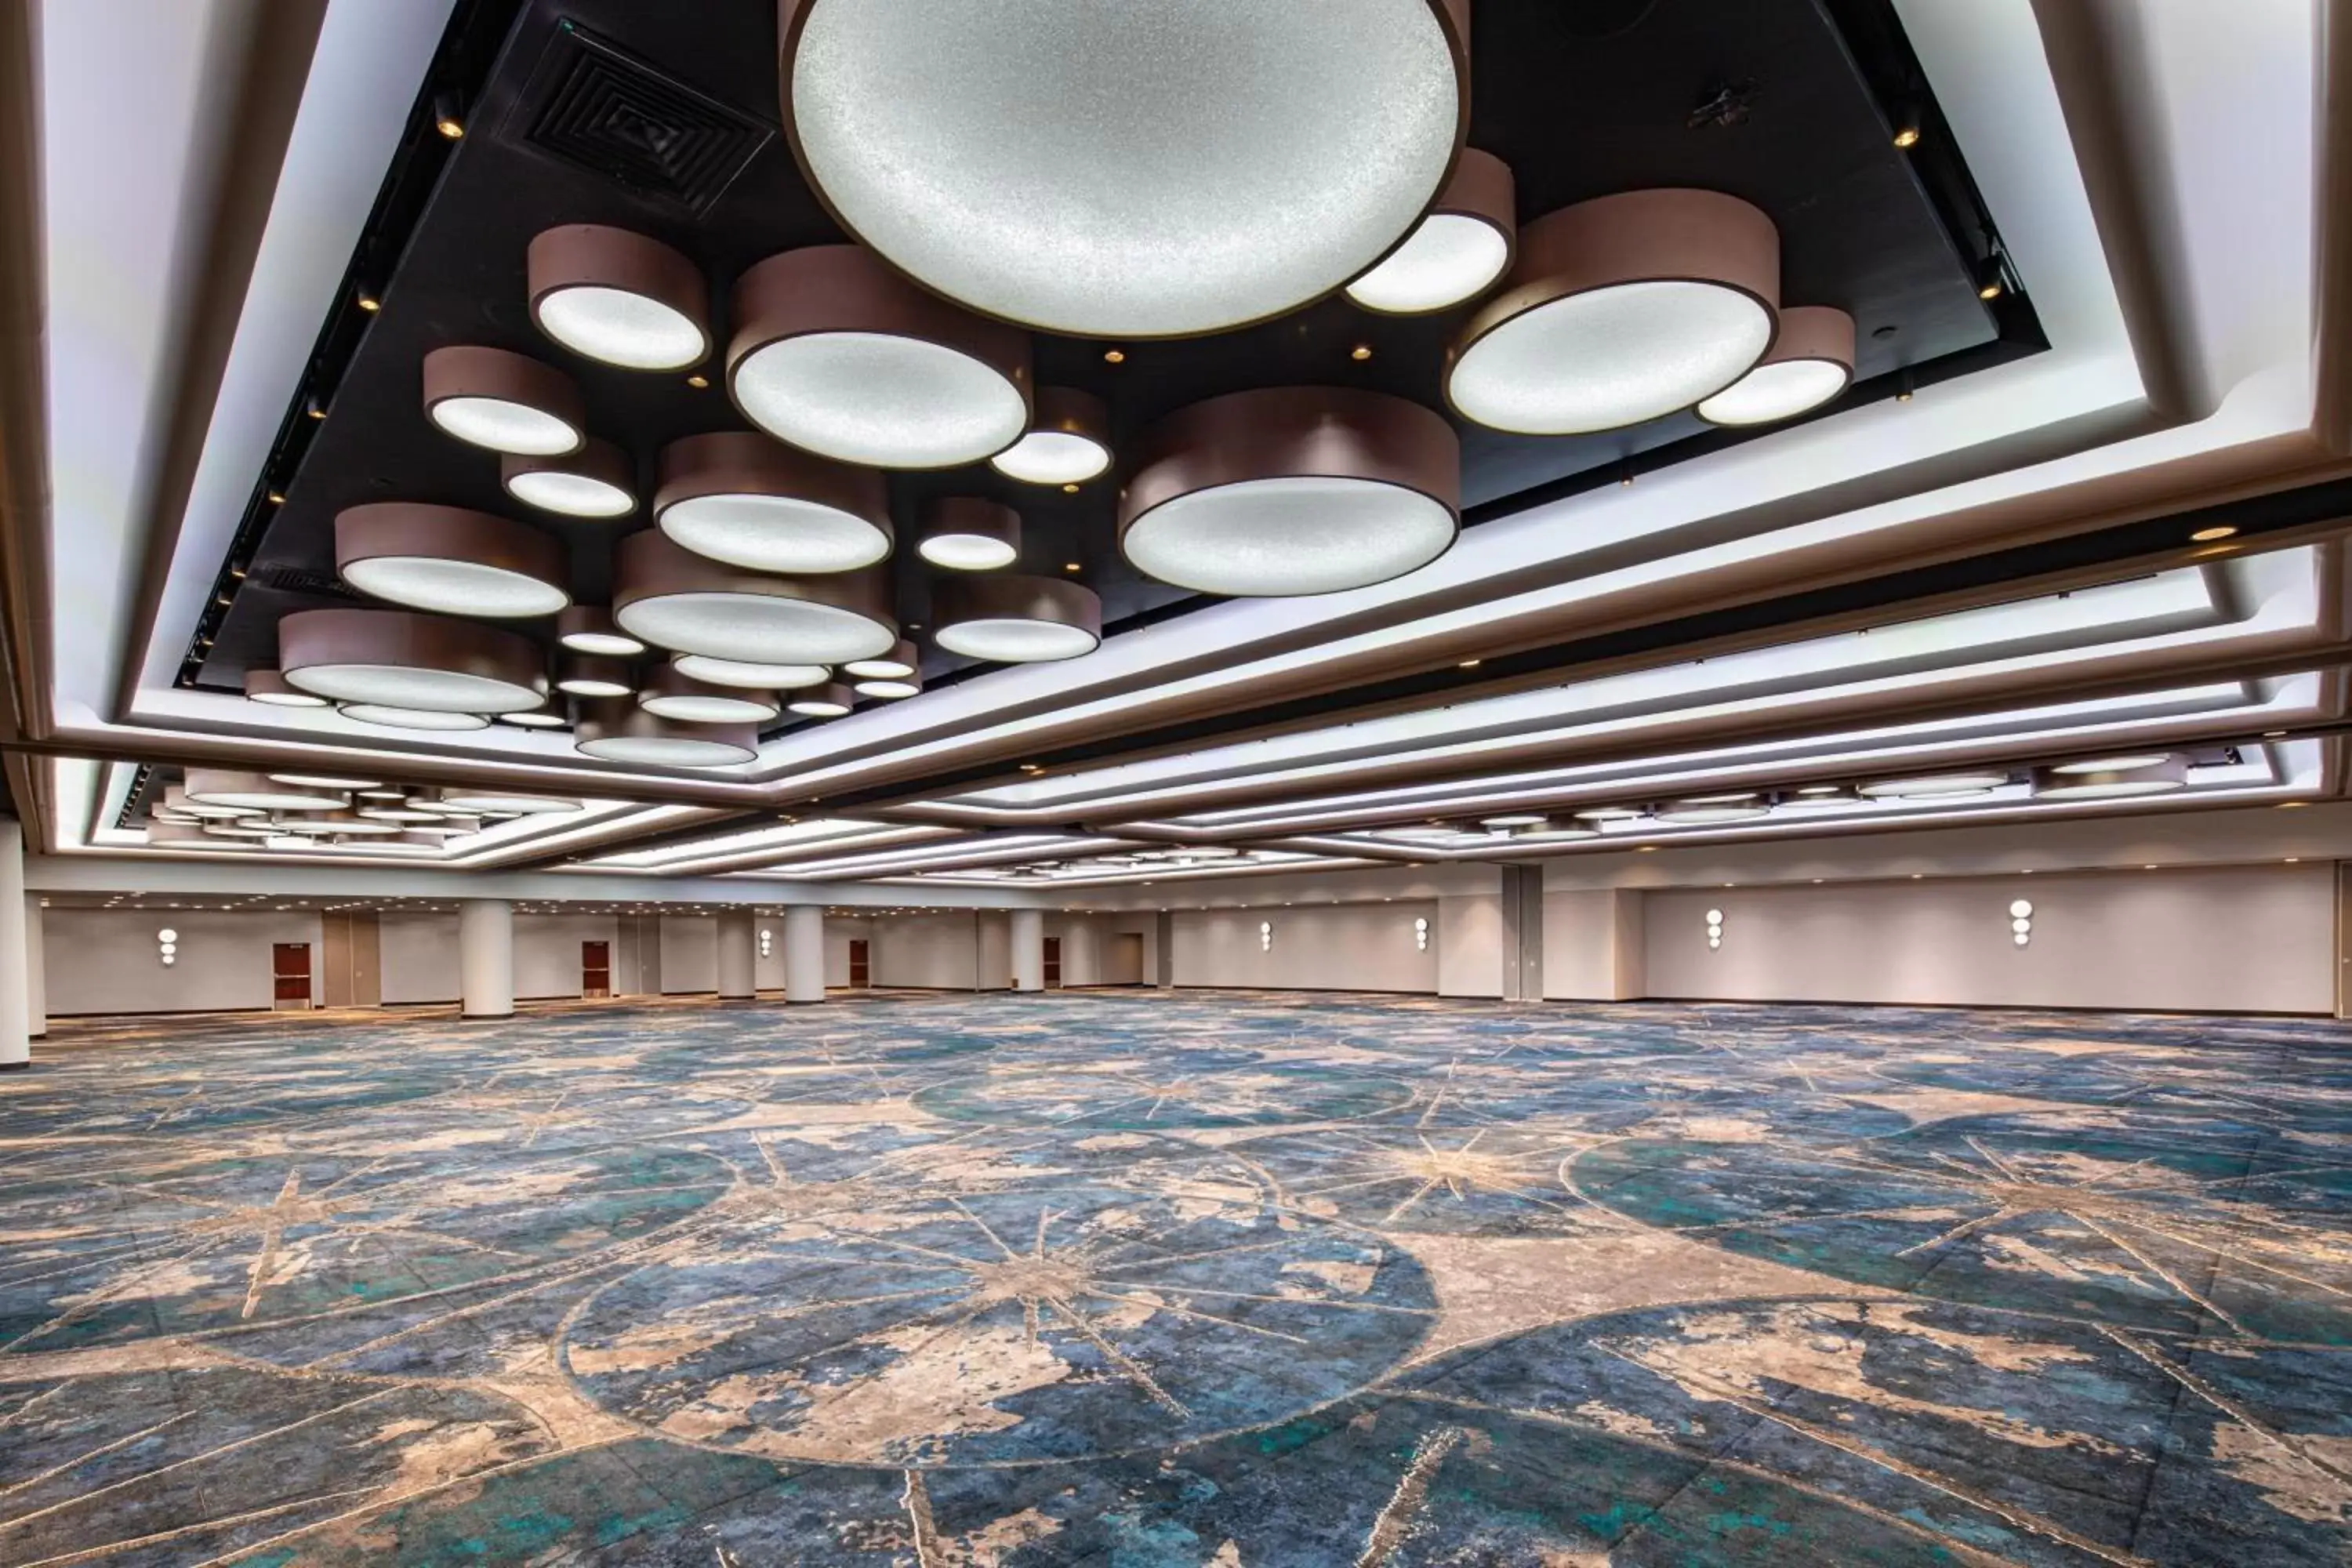 Meeting/conference room in New York Marriott Marquis